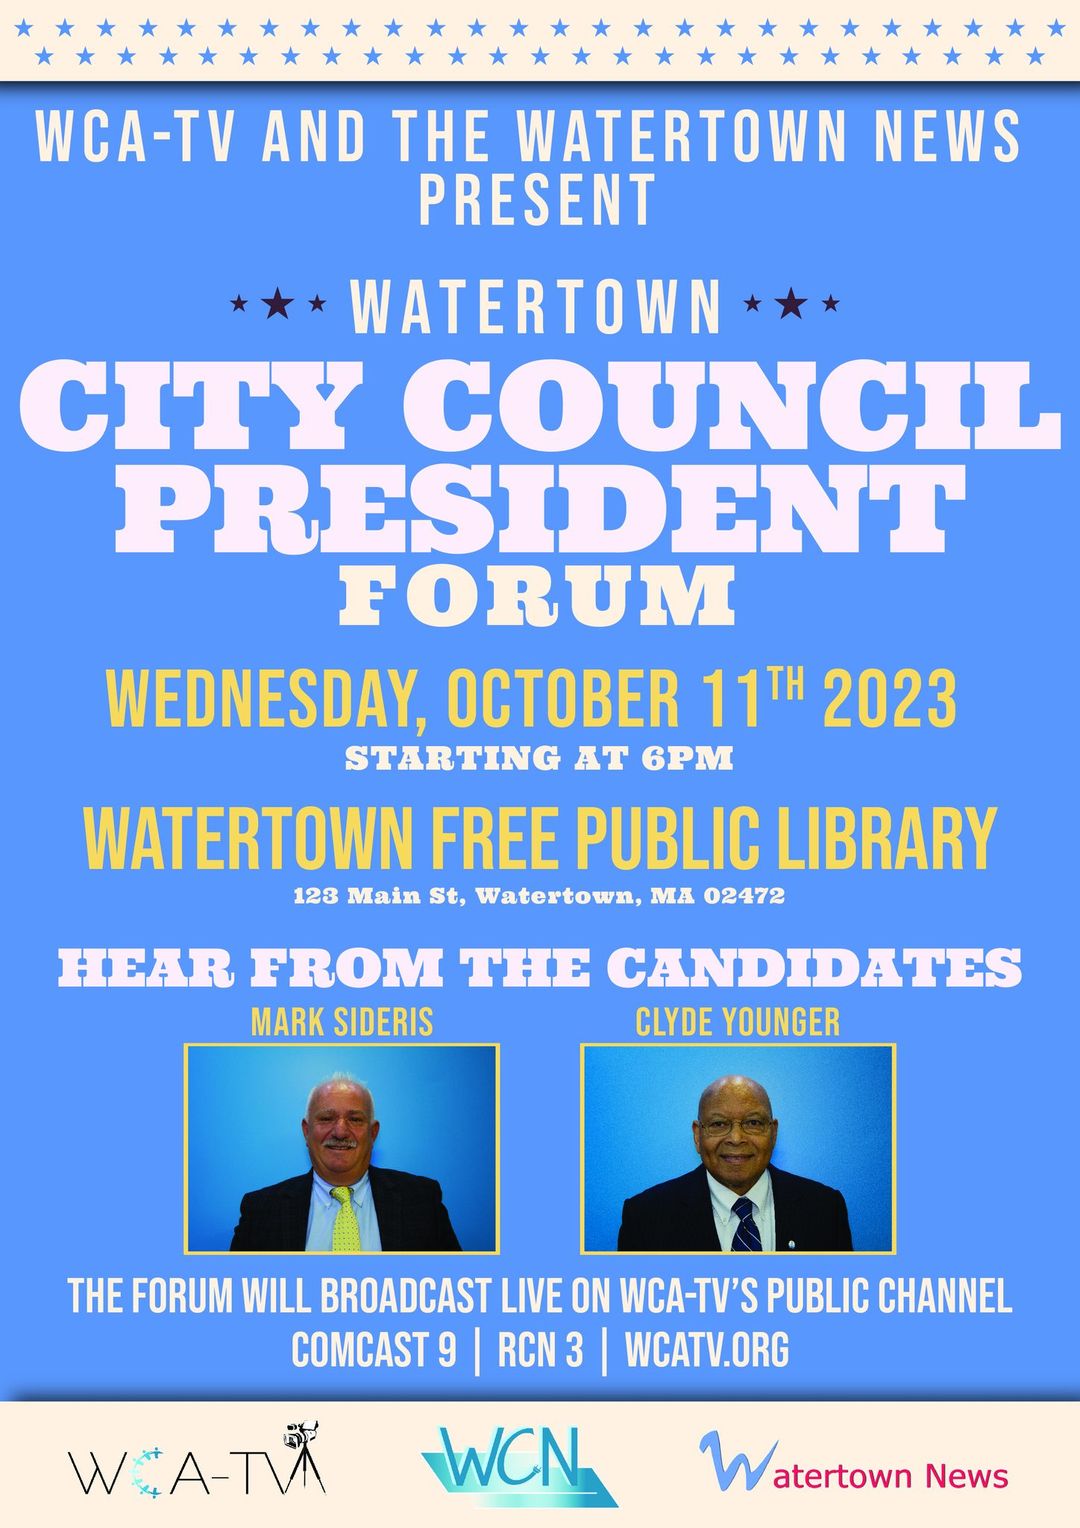 Council President Candidate Forum a Week Away, Submit Your